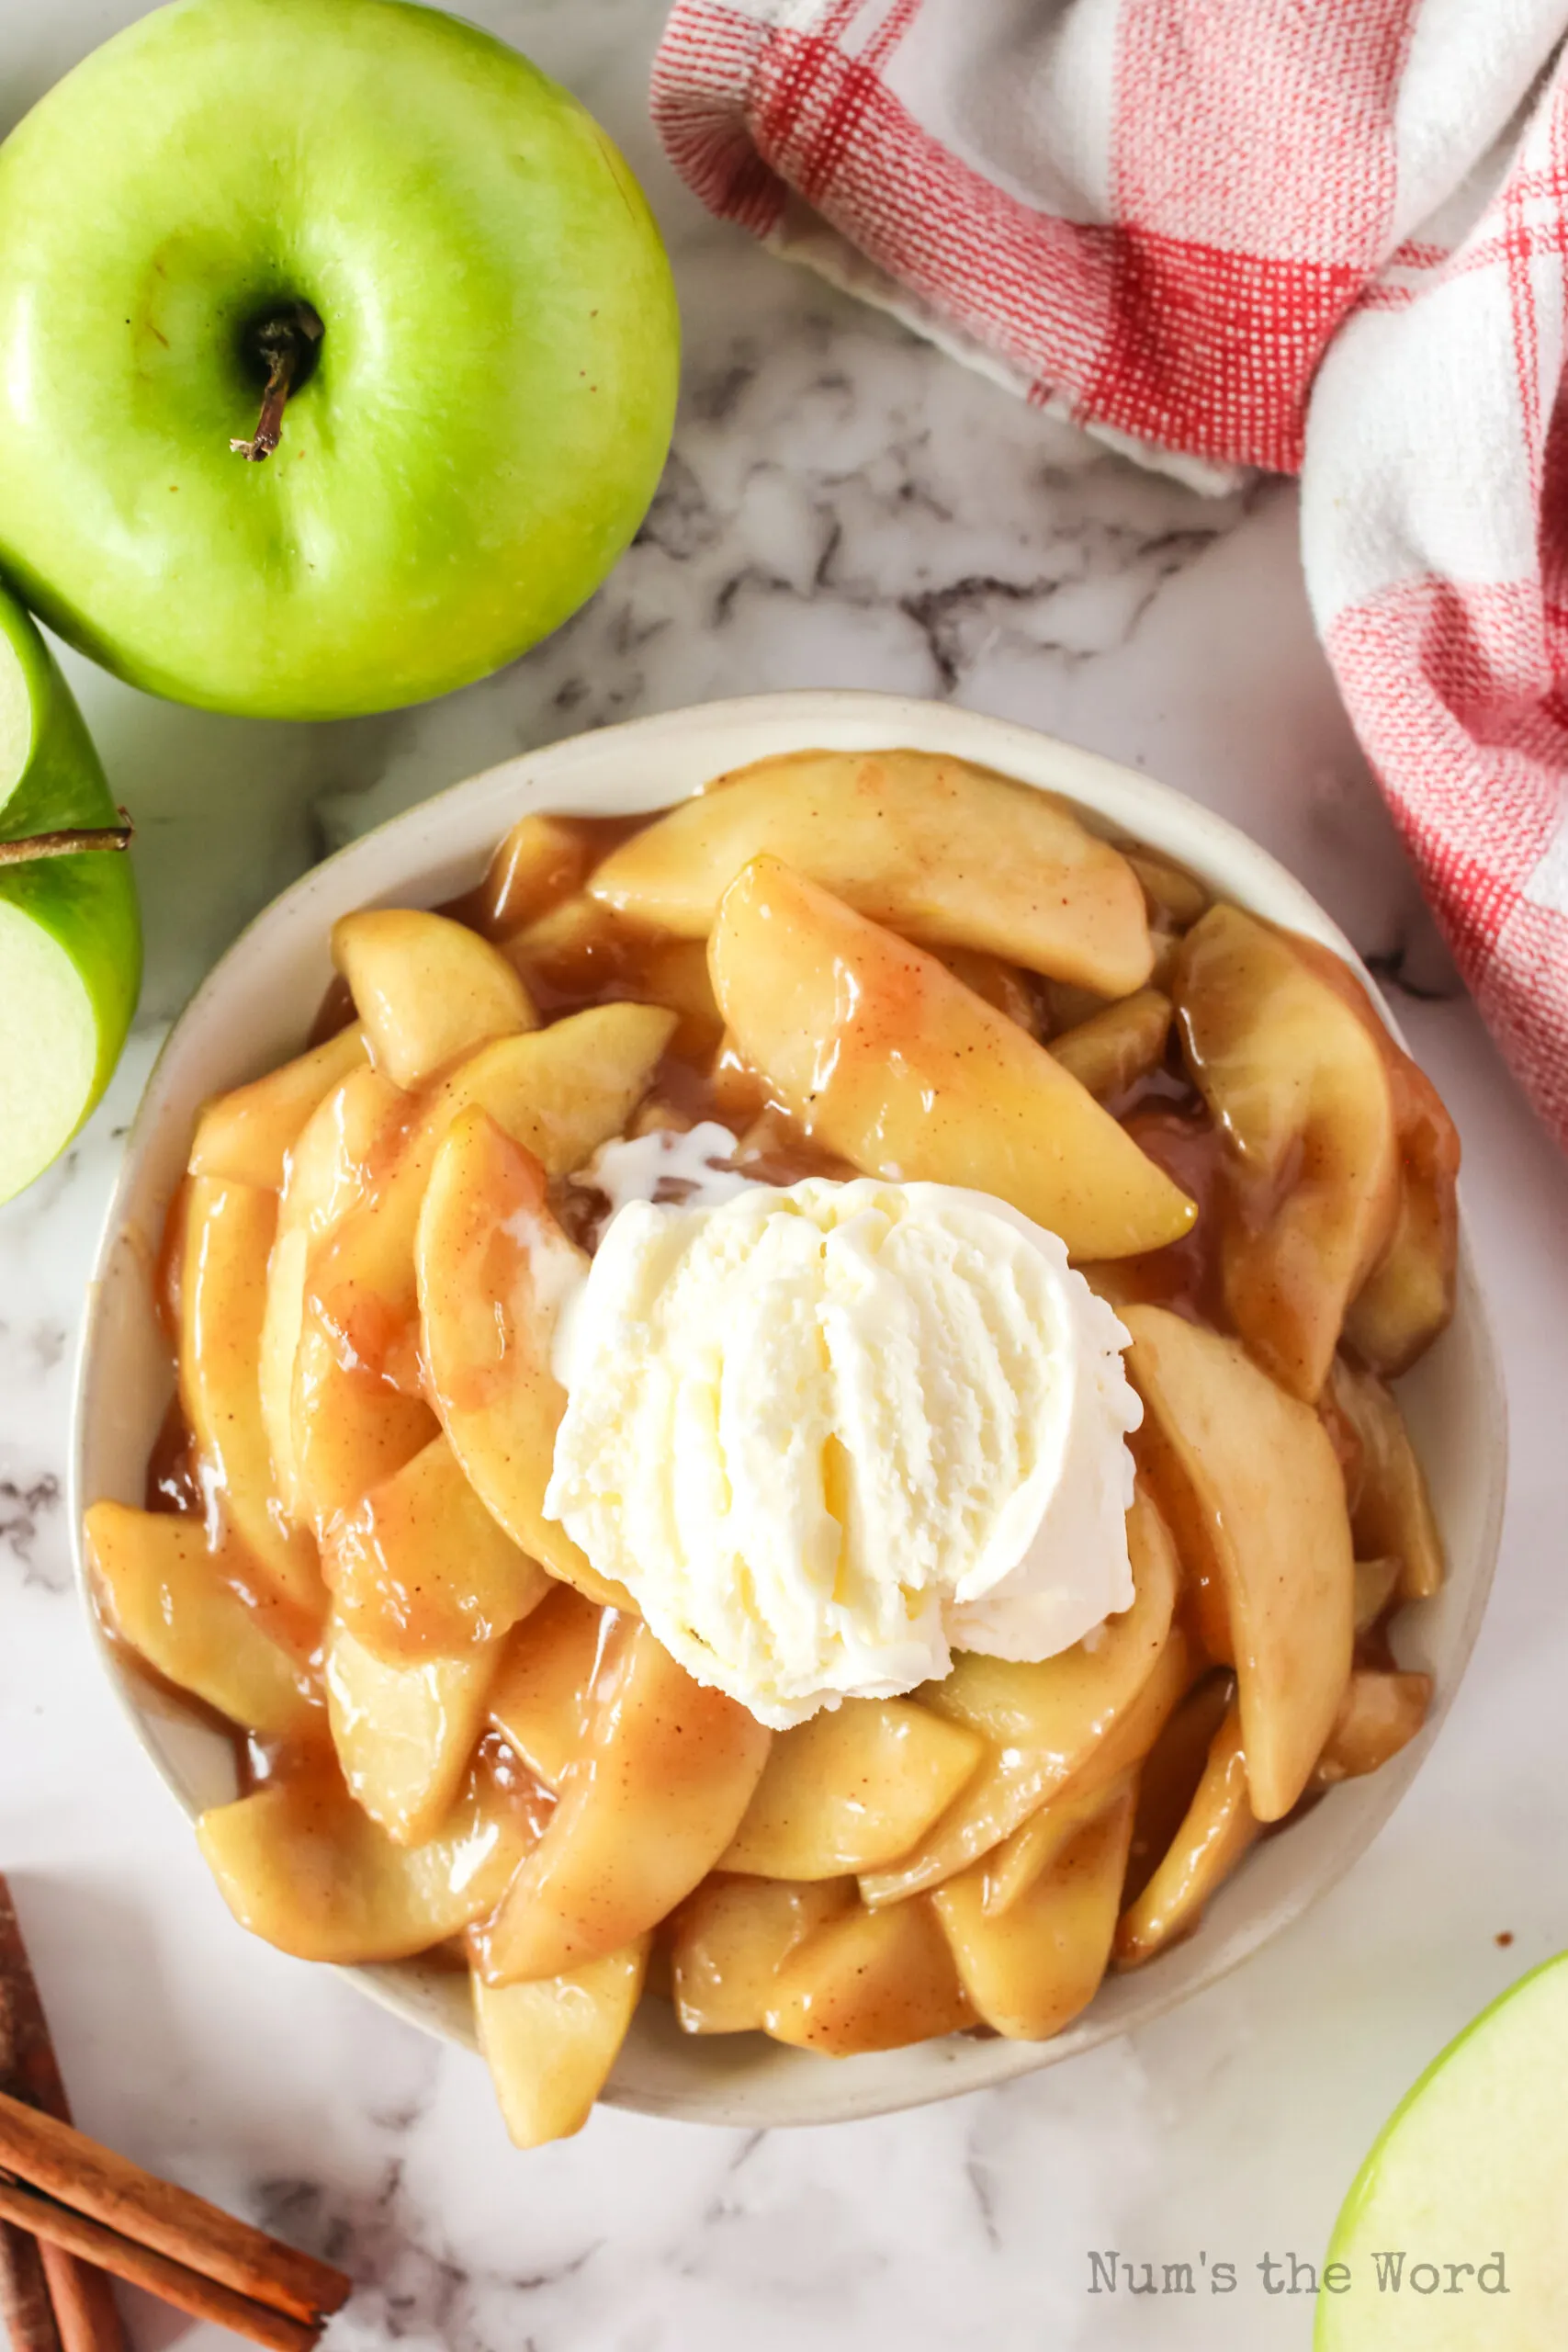 zoomed out image of apples in bowl with scoop of ice cream